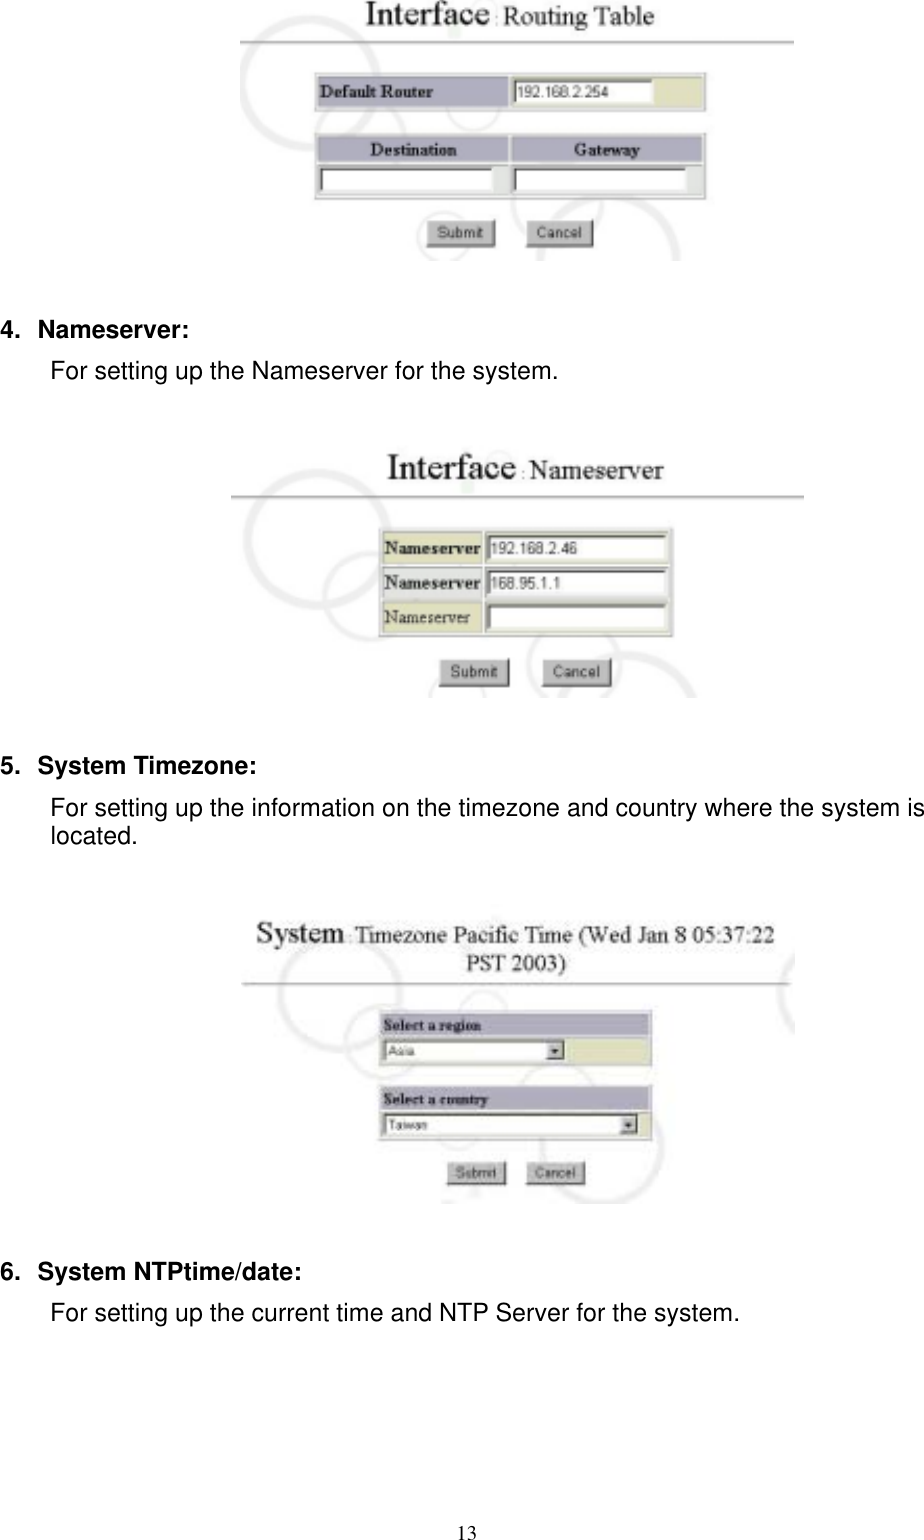  13  4. Nameserver: For setting up the Nameserver for the system.     5. System Timezone: For setting up the information on the timezone and country where the system is located.    6. System NTPtime/date: For setting up the current time and NTP Server for the system.  